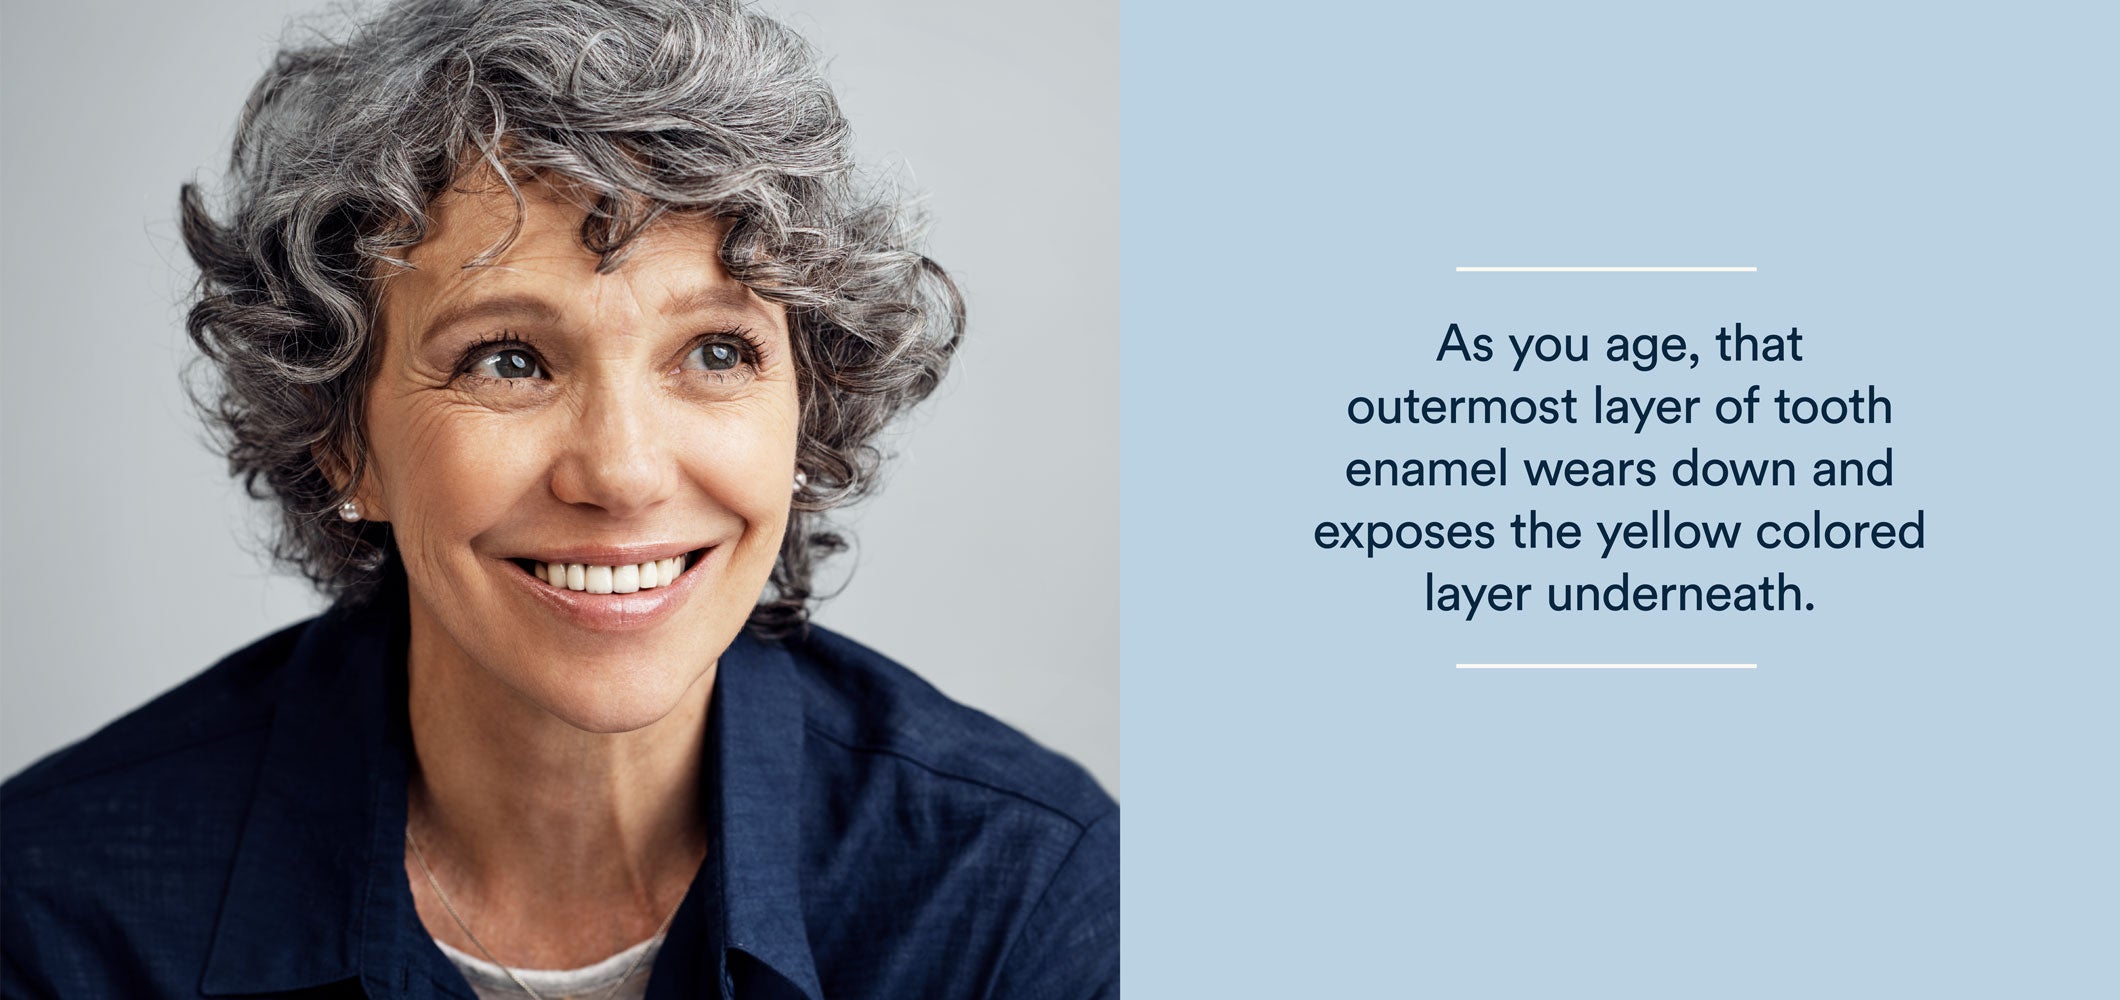 as you age, that outermost layer of tooth enamel wears down and exposes the yellow colored layer underneath